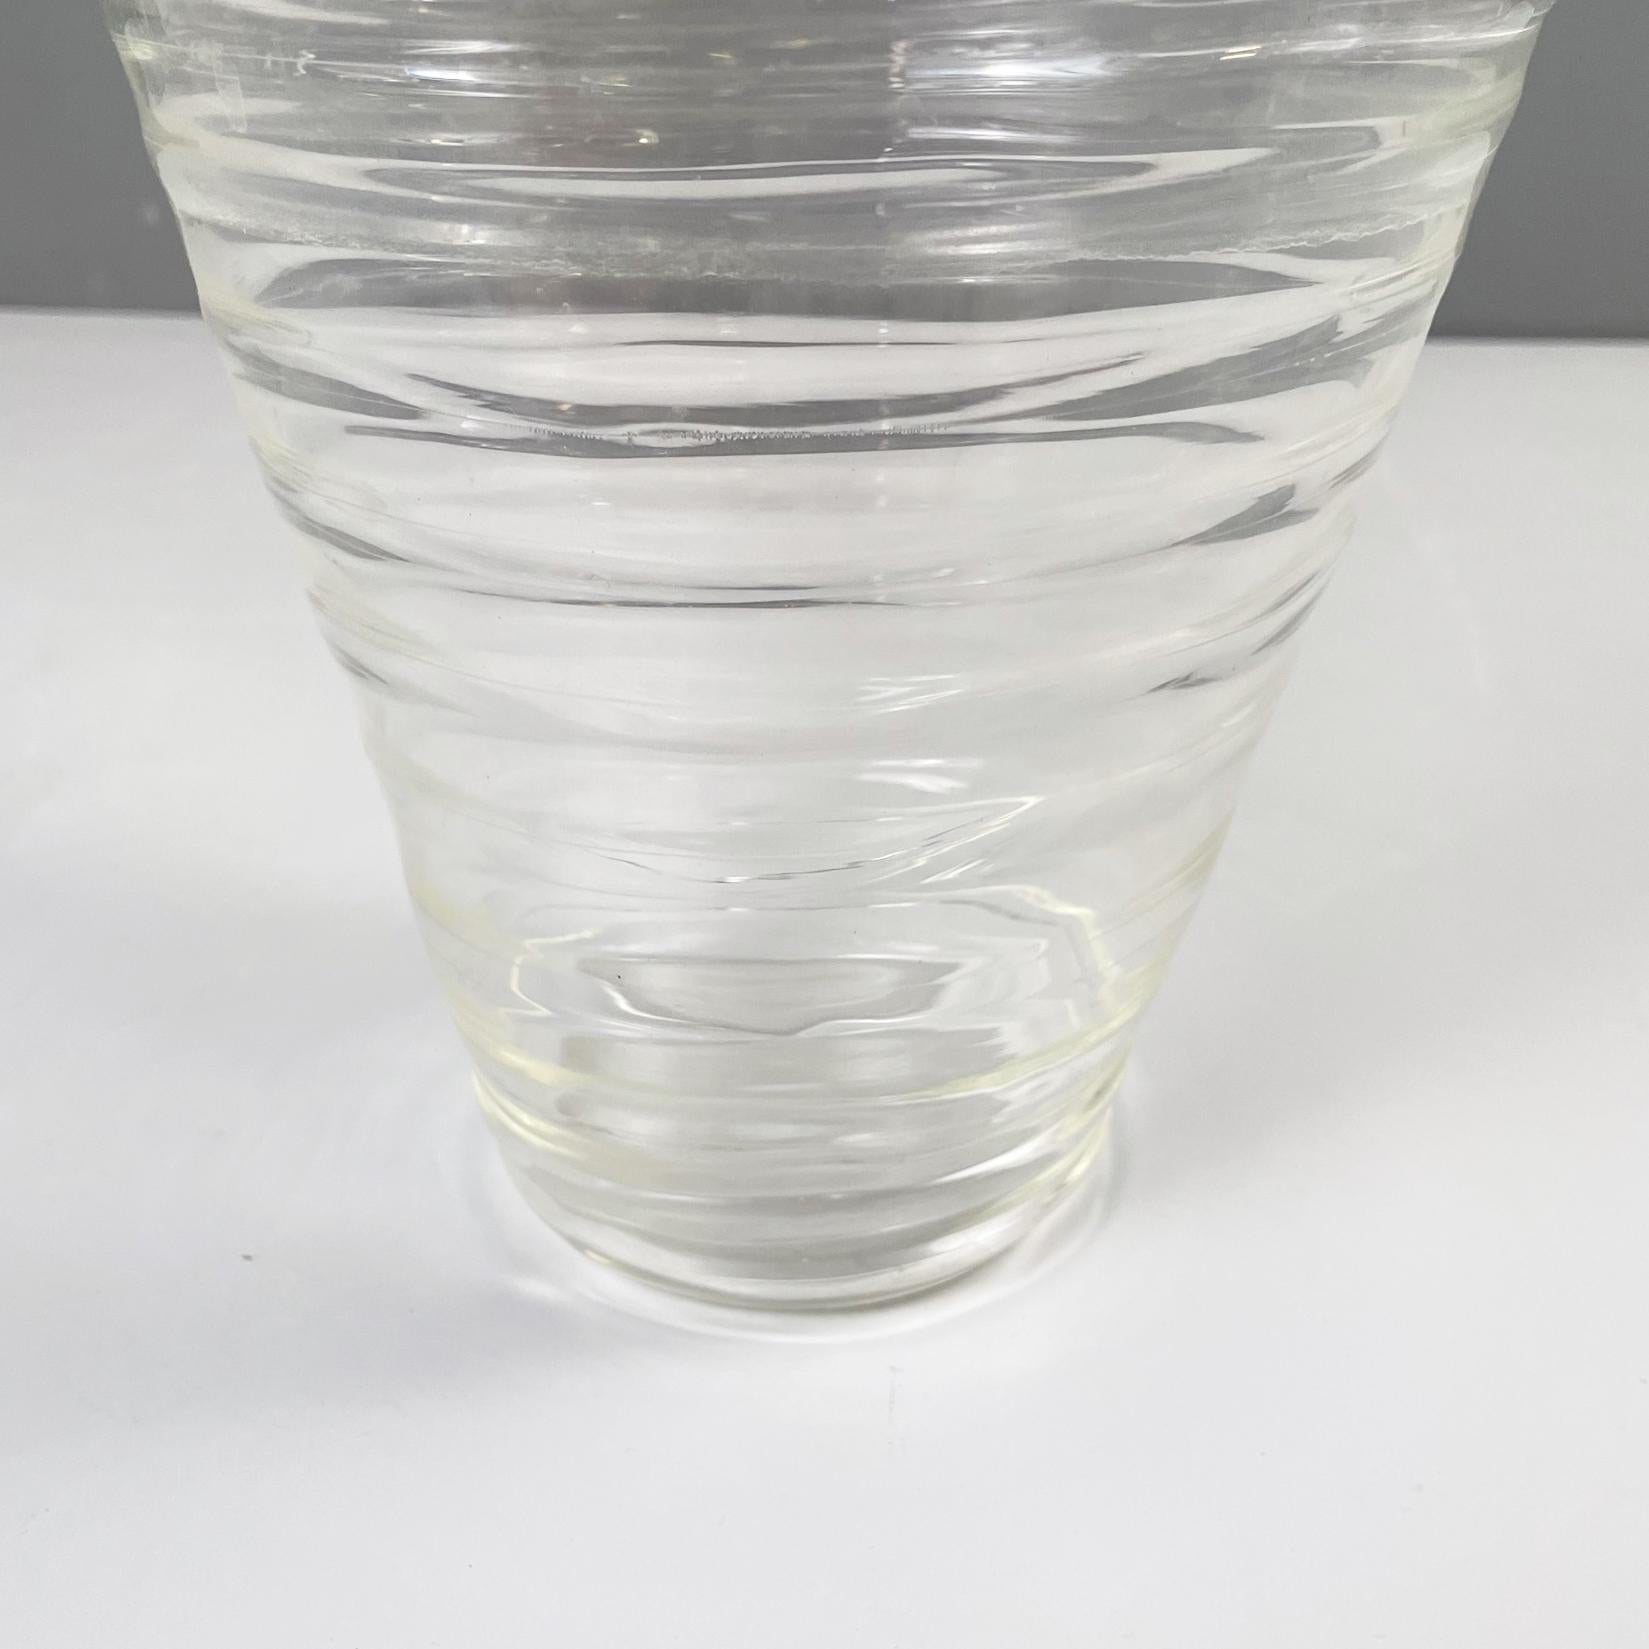 Italian modern Glass vase with round shape and spiral by Roberto Faccioli, 1990s For Sale 3